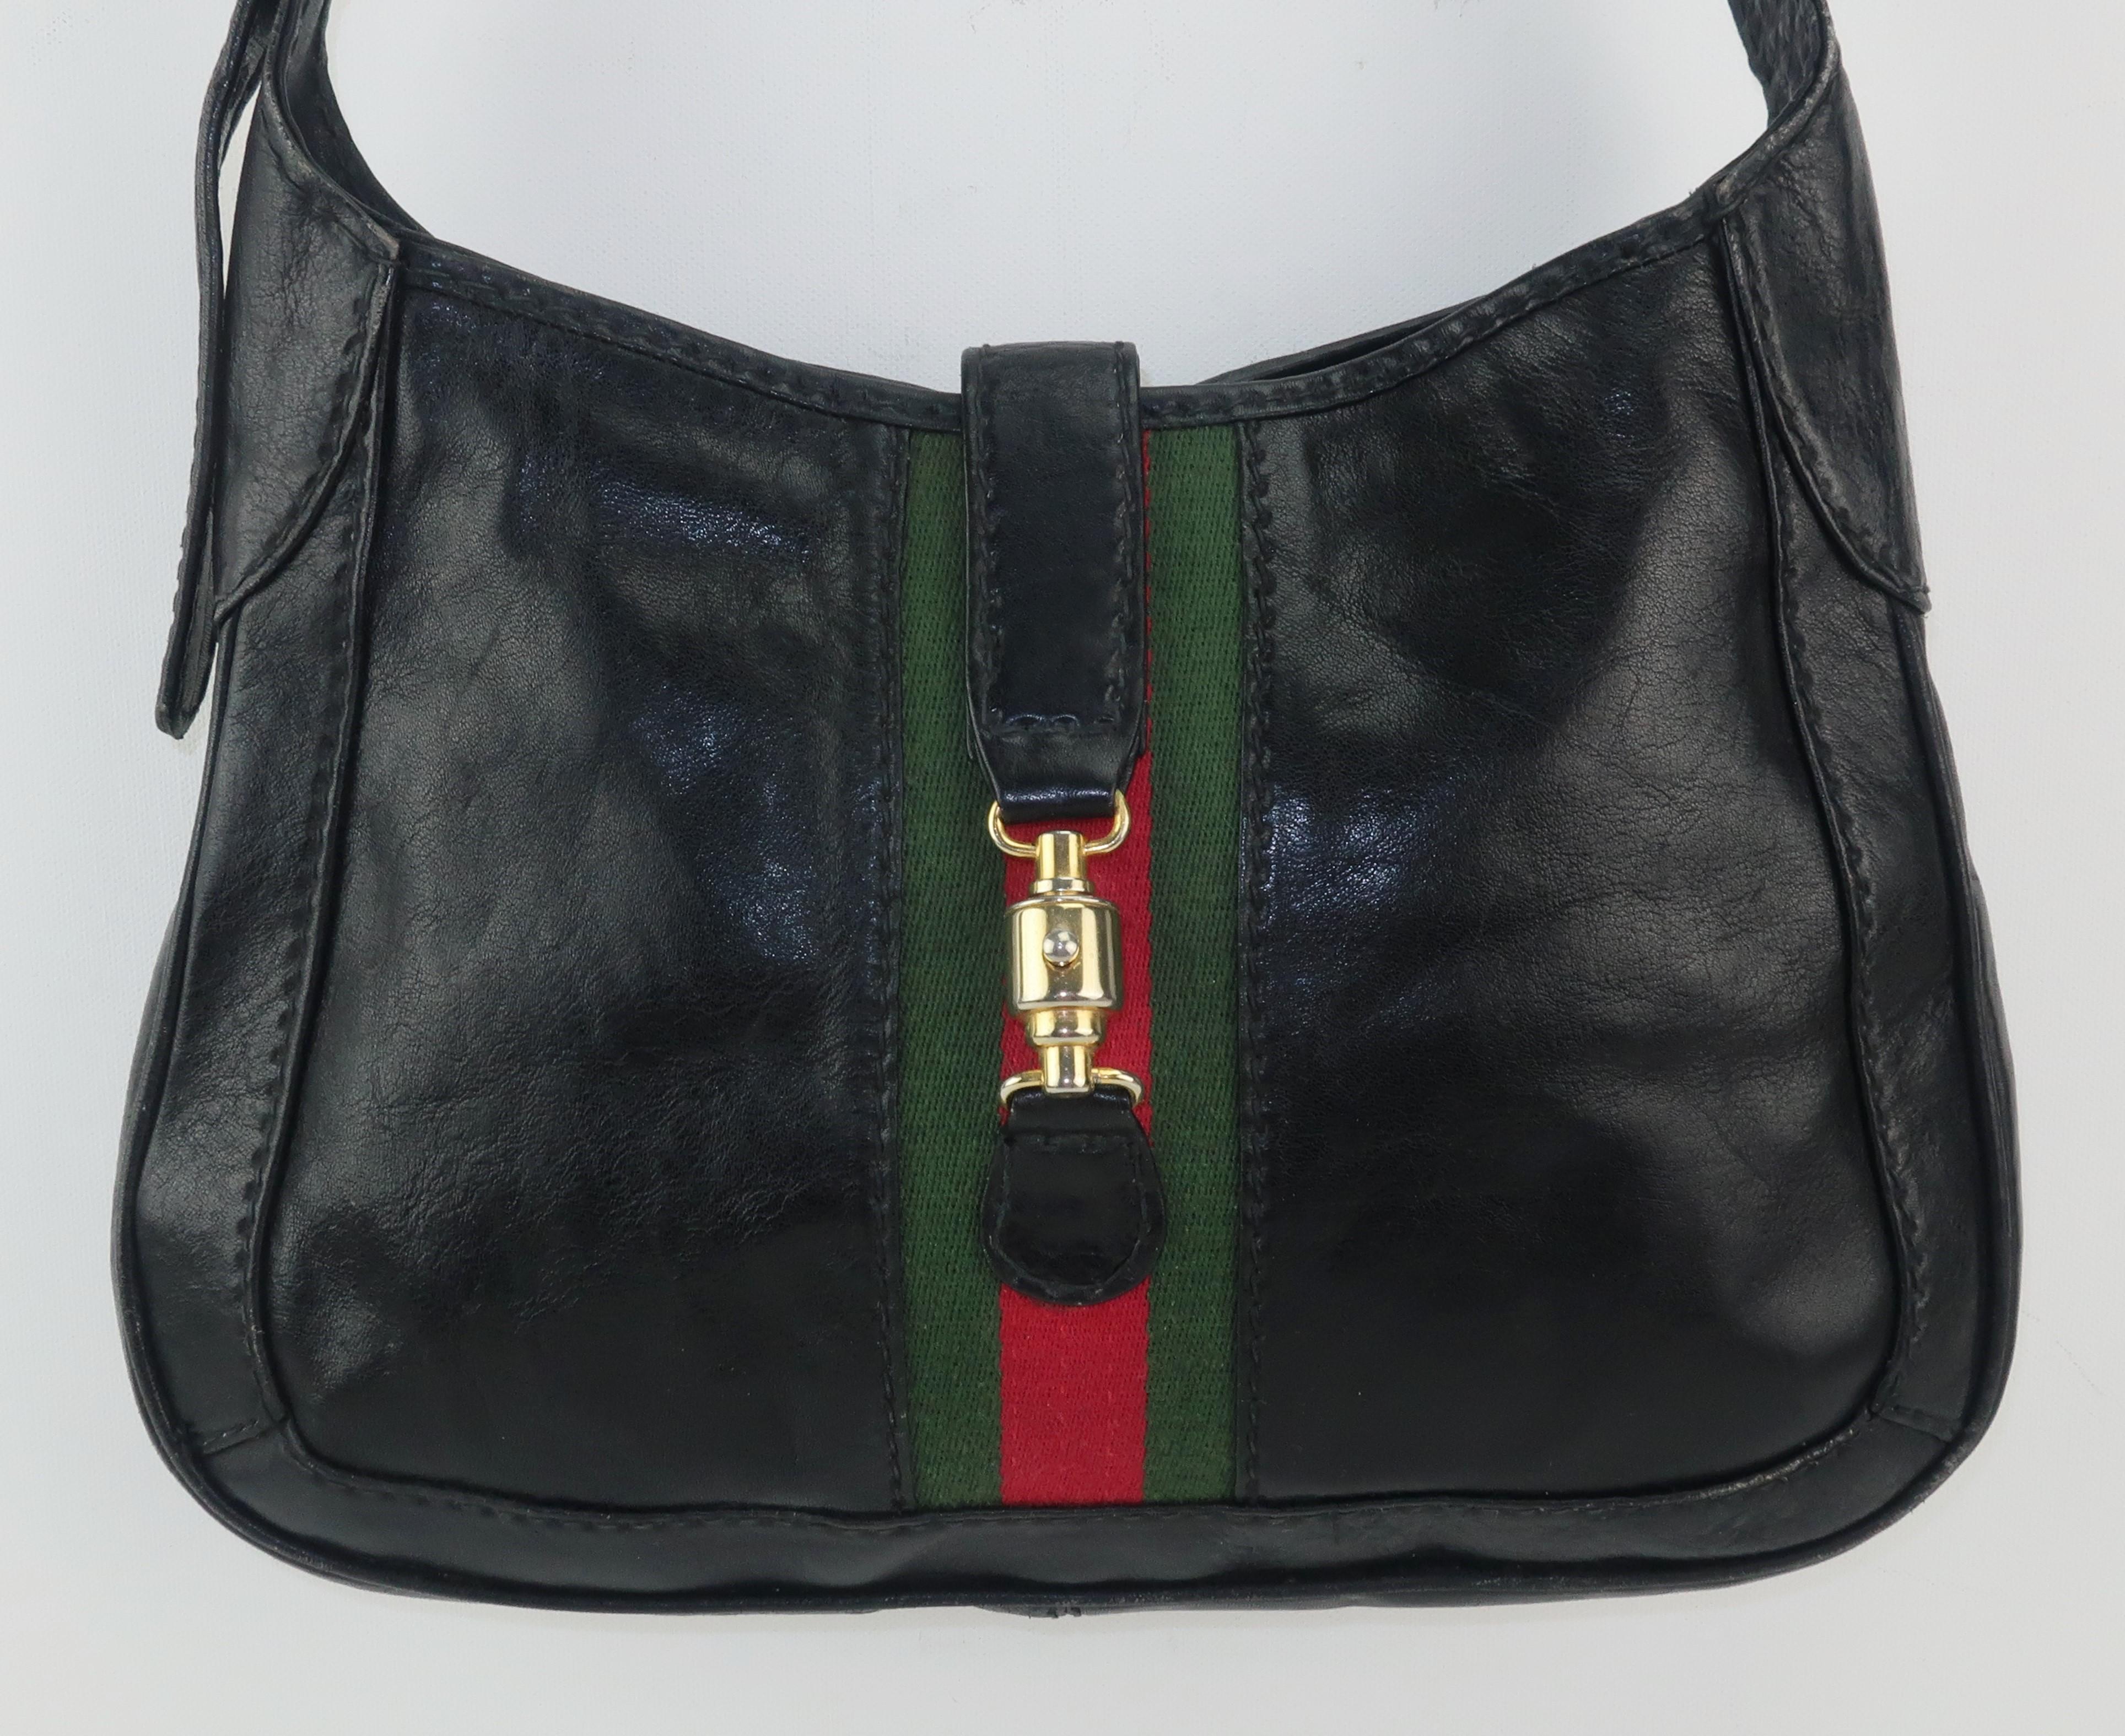 C.1970 Neiman Marcus Italian black leather handbag with a Gucci style red & green stripe accent.  The unique gold tone closure has a push button release and a decidedly equestrian look.  The shoulder strap is adjustable and the roomy interior is